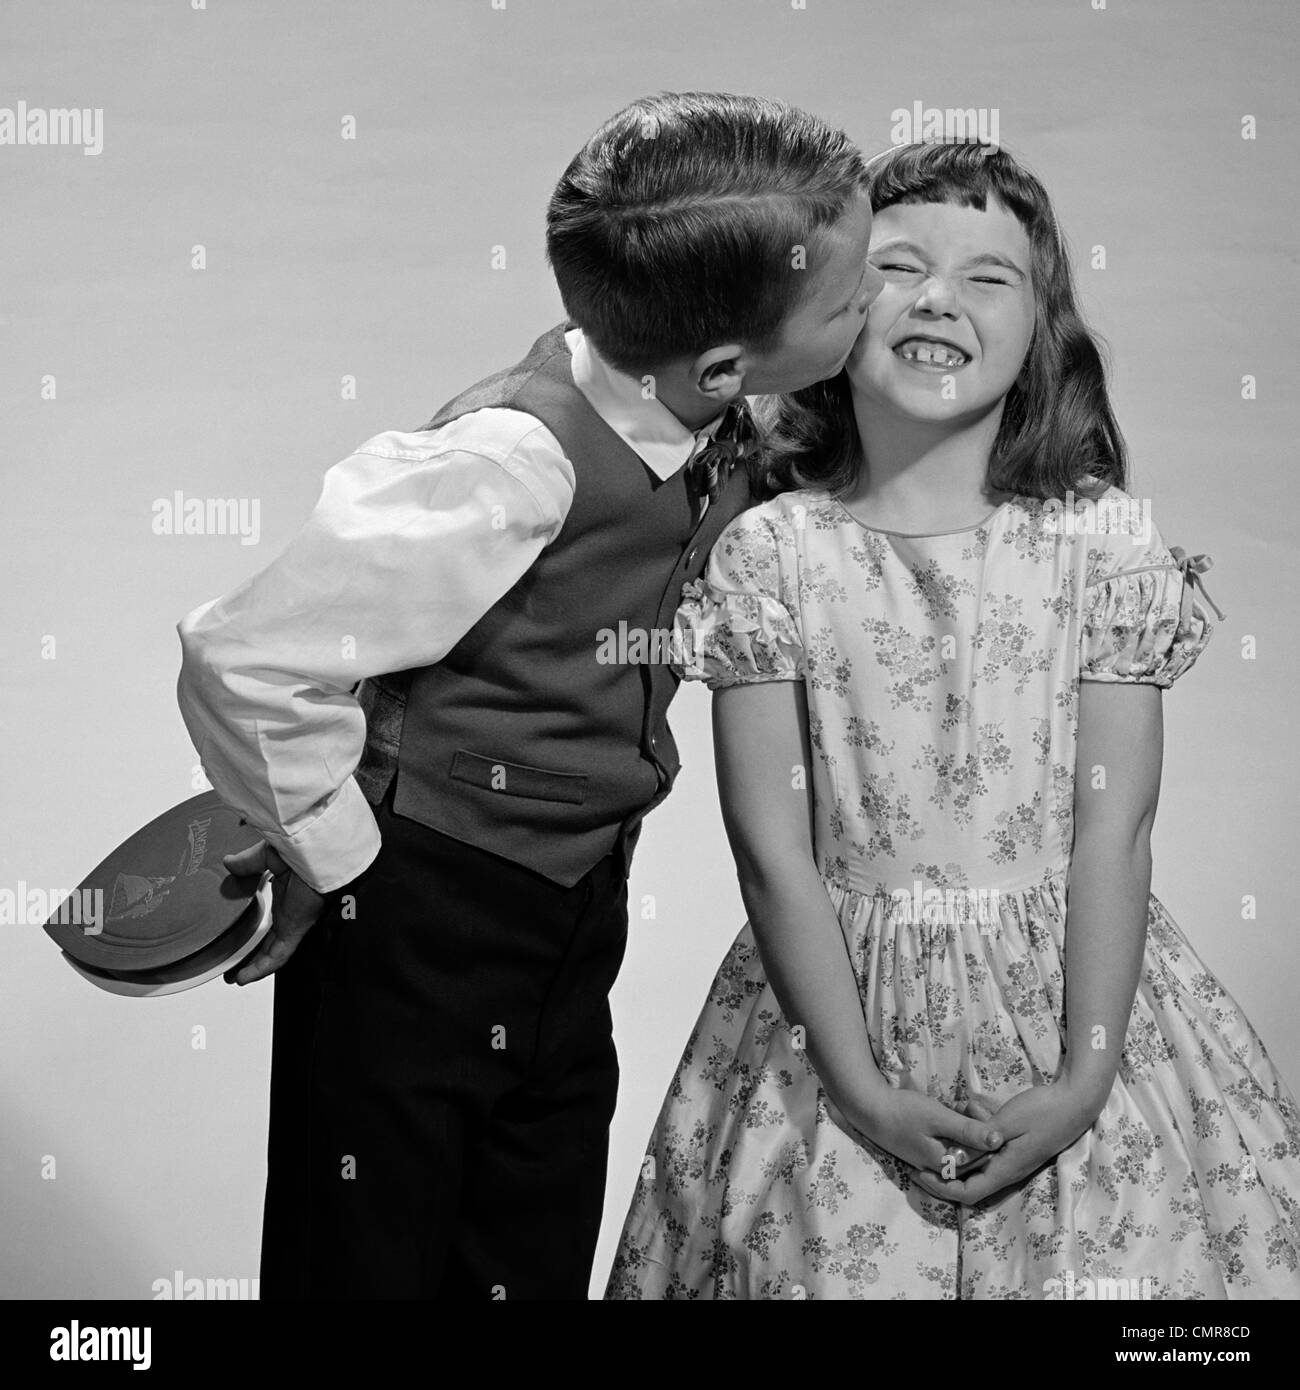 1950s 1960s BOY IN VEST & BOW TIE HOLDING VALENTINE CANDY KISSING CHEEK OF GIRL MAKING A FACE Stock Photo